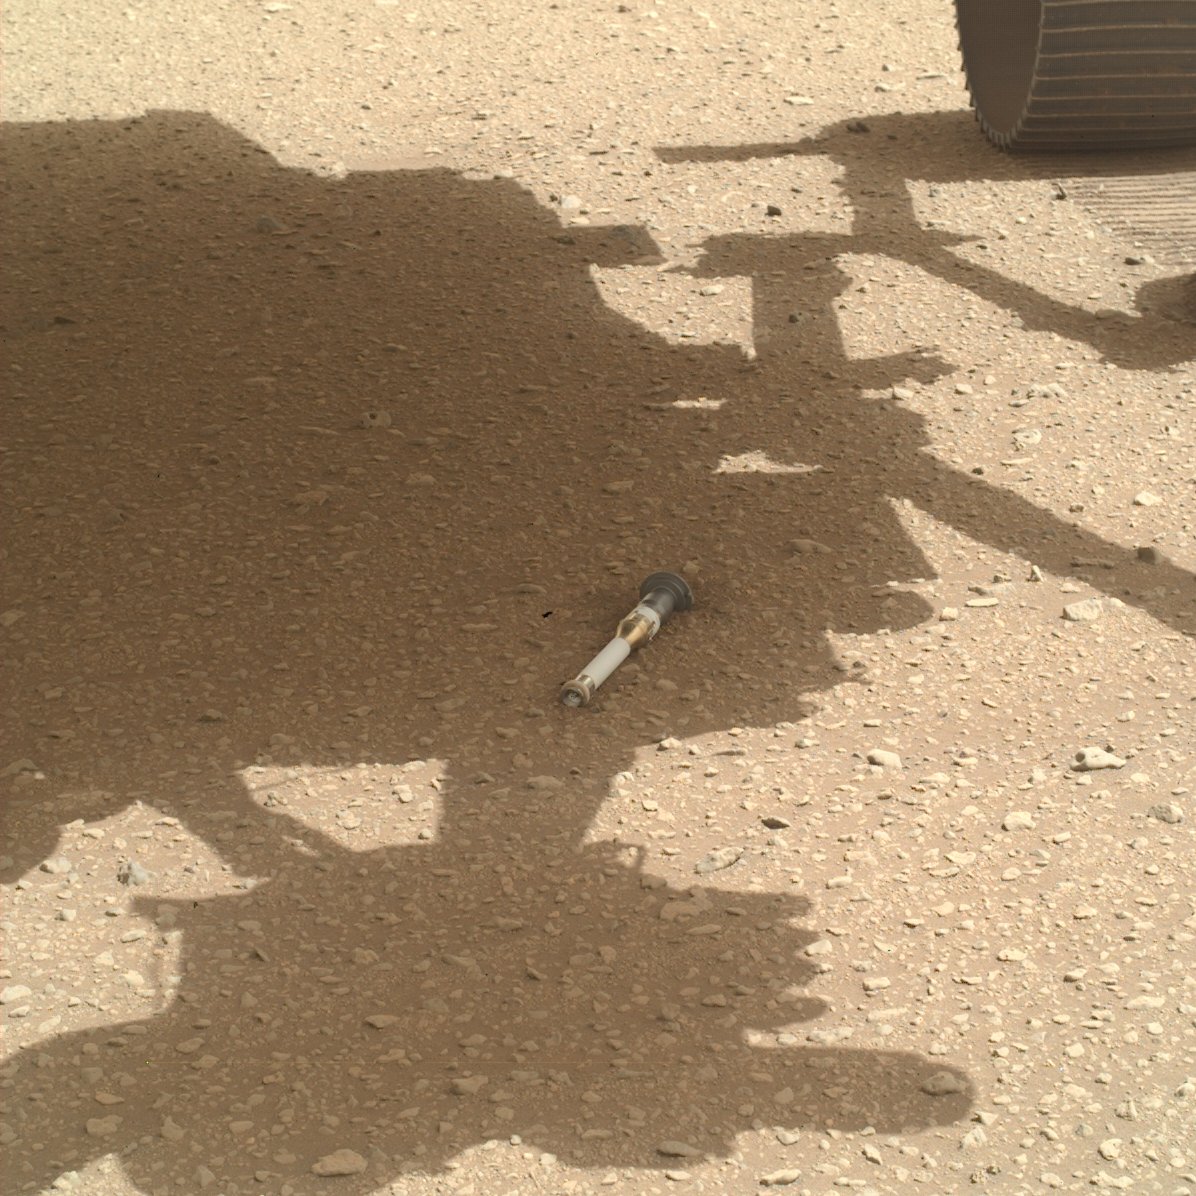 NASA's Perseverance rover drops another sample tube on Mars surface